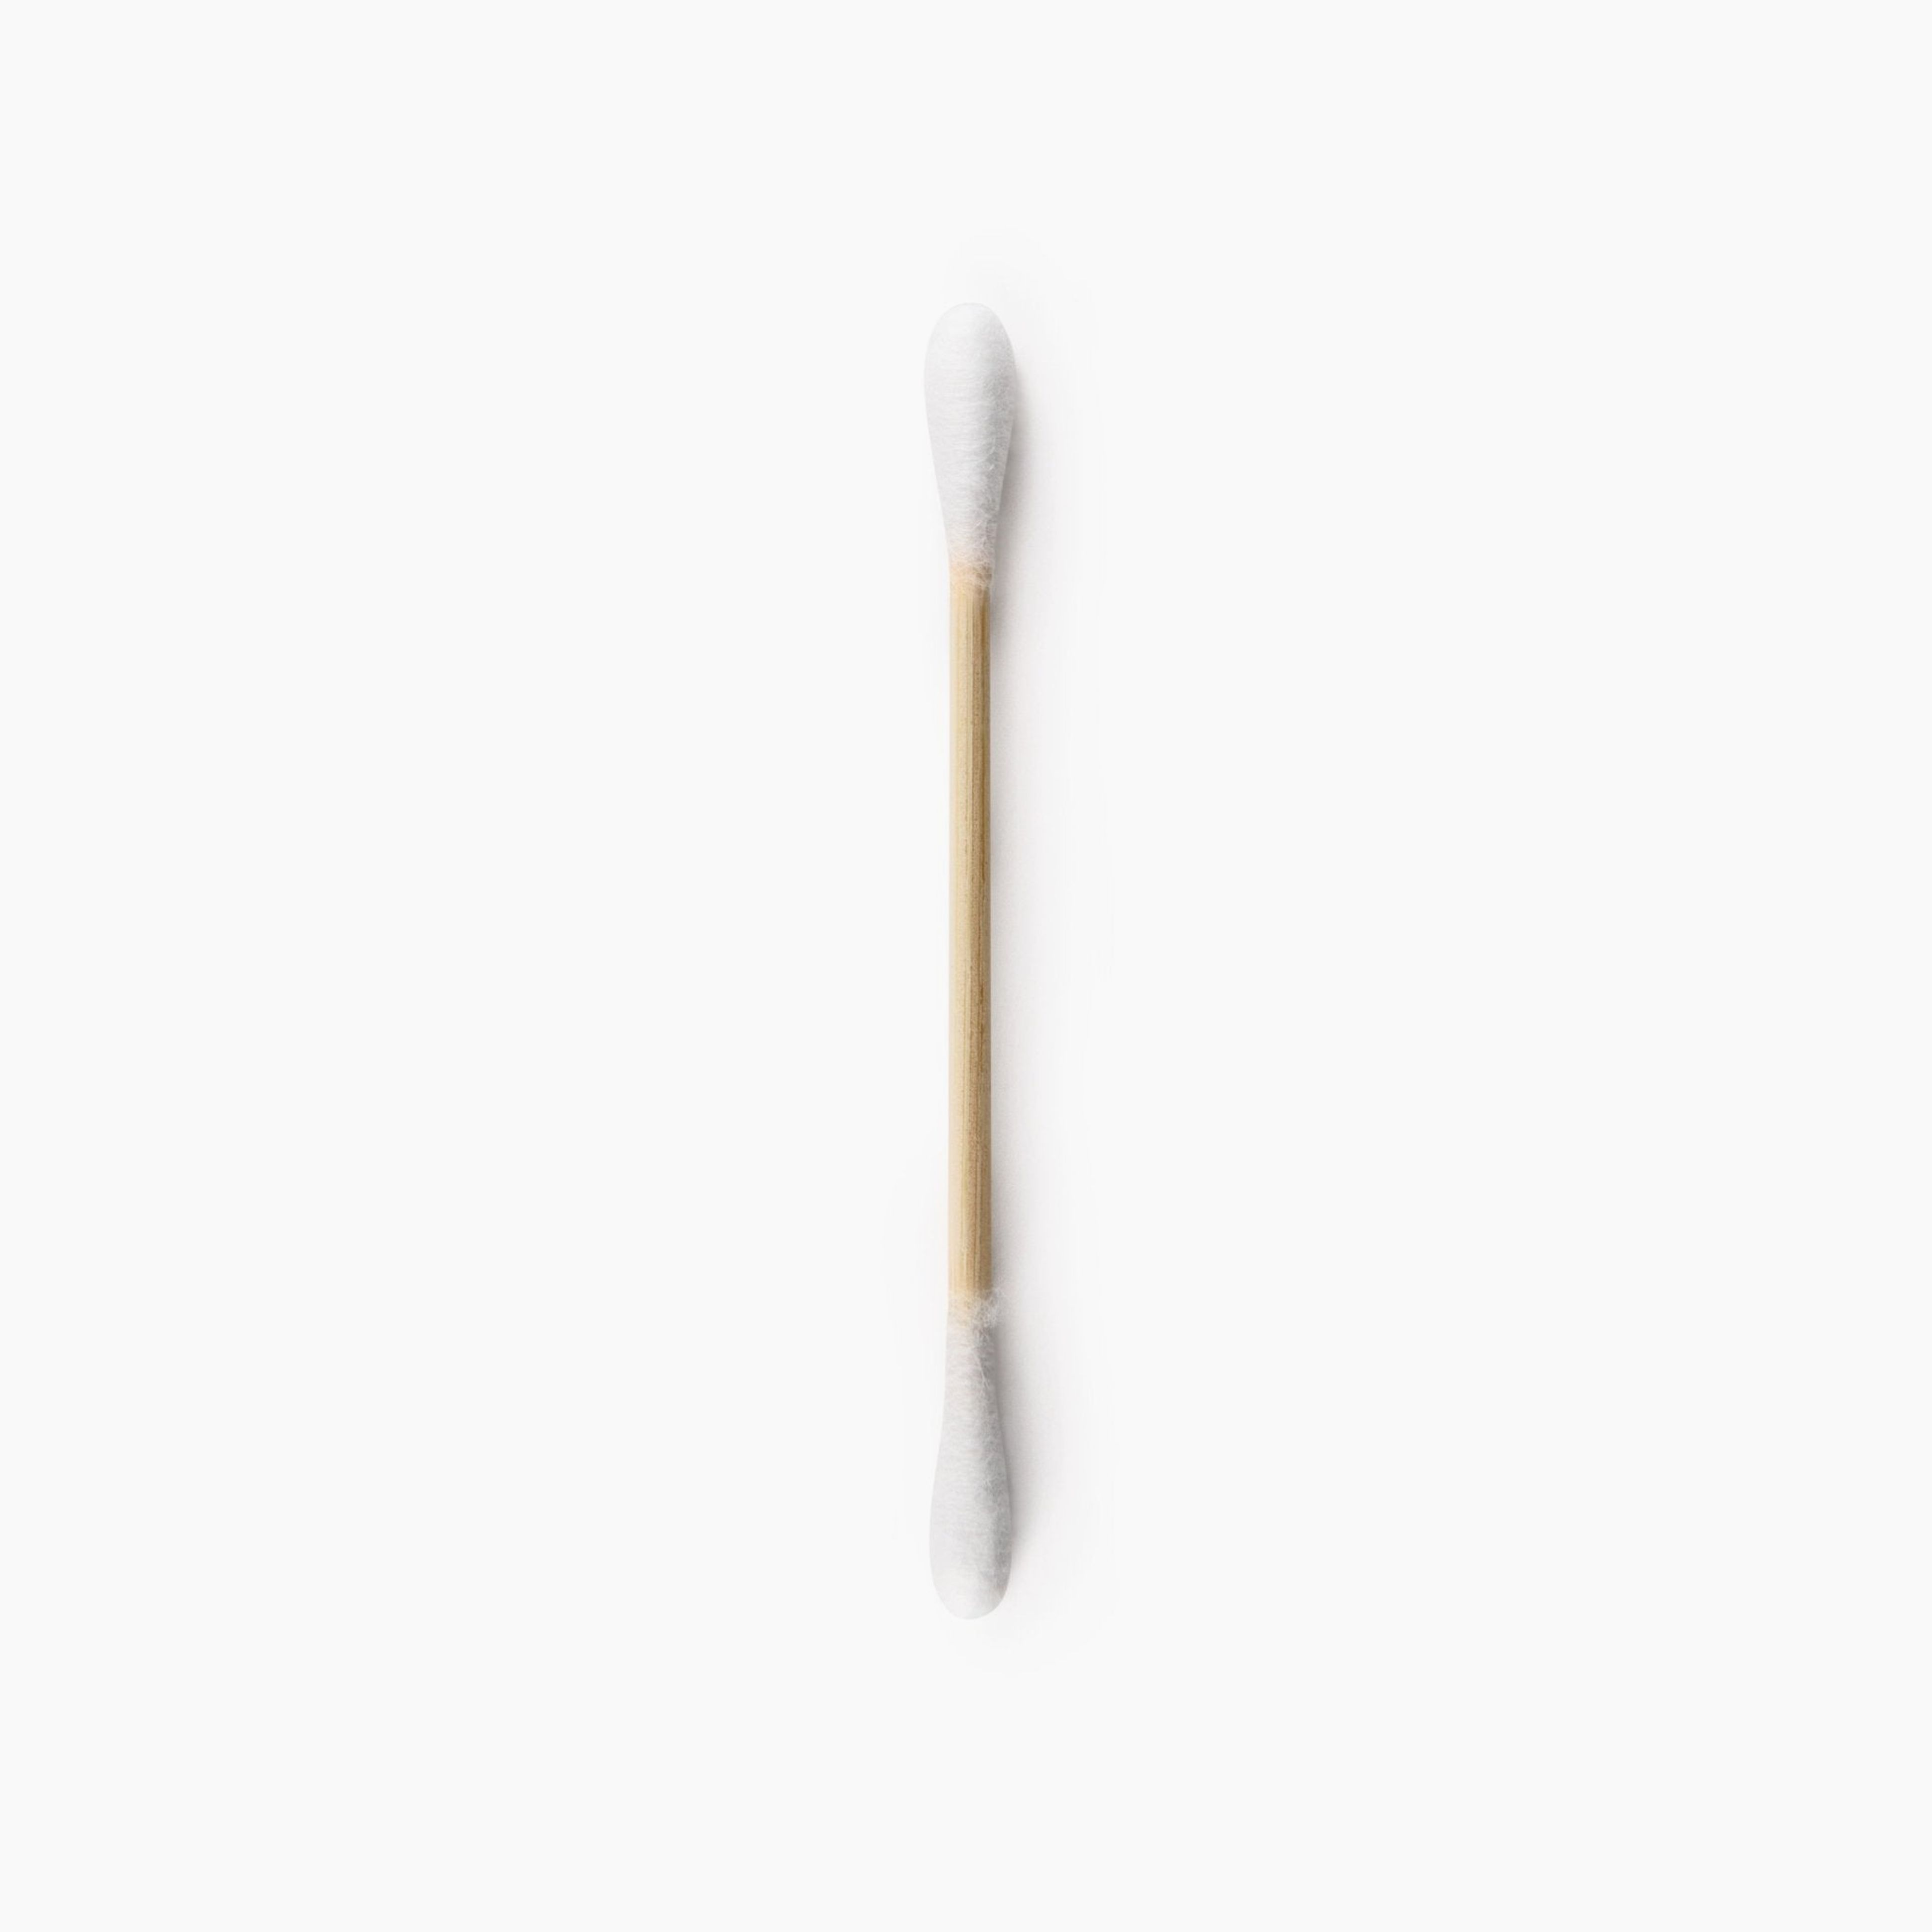 Cotton Swabs - White 100-pack